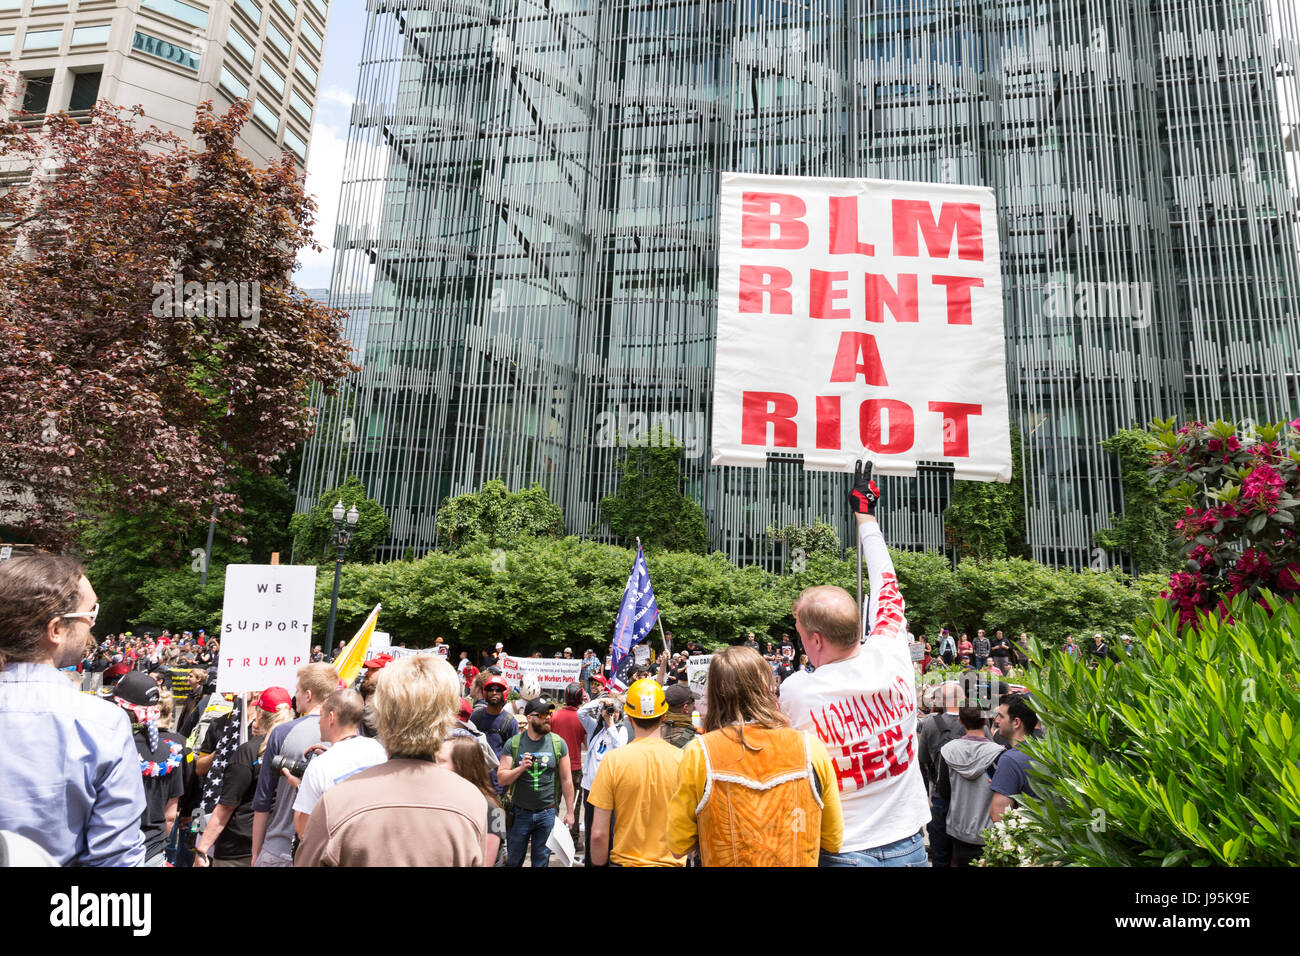 Portland, United States. 04th June, 2017. Portland, Oregon: Supporters at the Trump Free Speech Rally Portland. Organized by Joey Gibson, a leader of the Patriot Prayer group, the rally in downtown Portland featured right-wing nationalist Kyle Chapman and speakers in support of free speech and President Trump. Credit: Paul Gordon/Alamy Live News Stock Photo